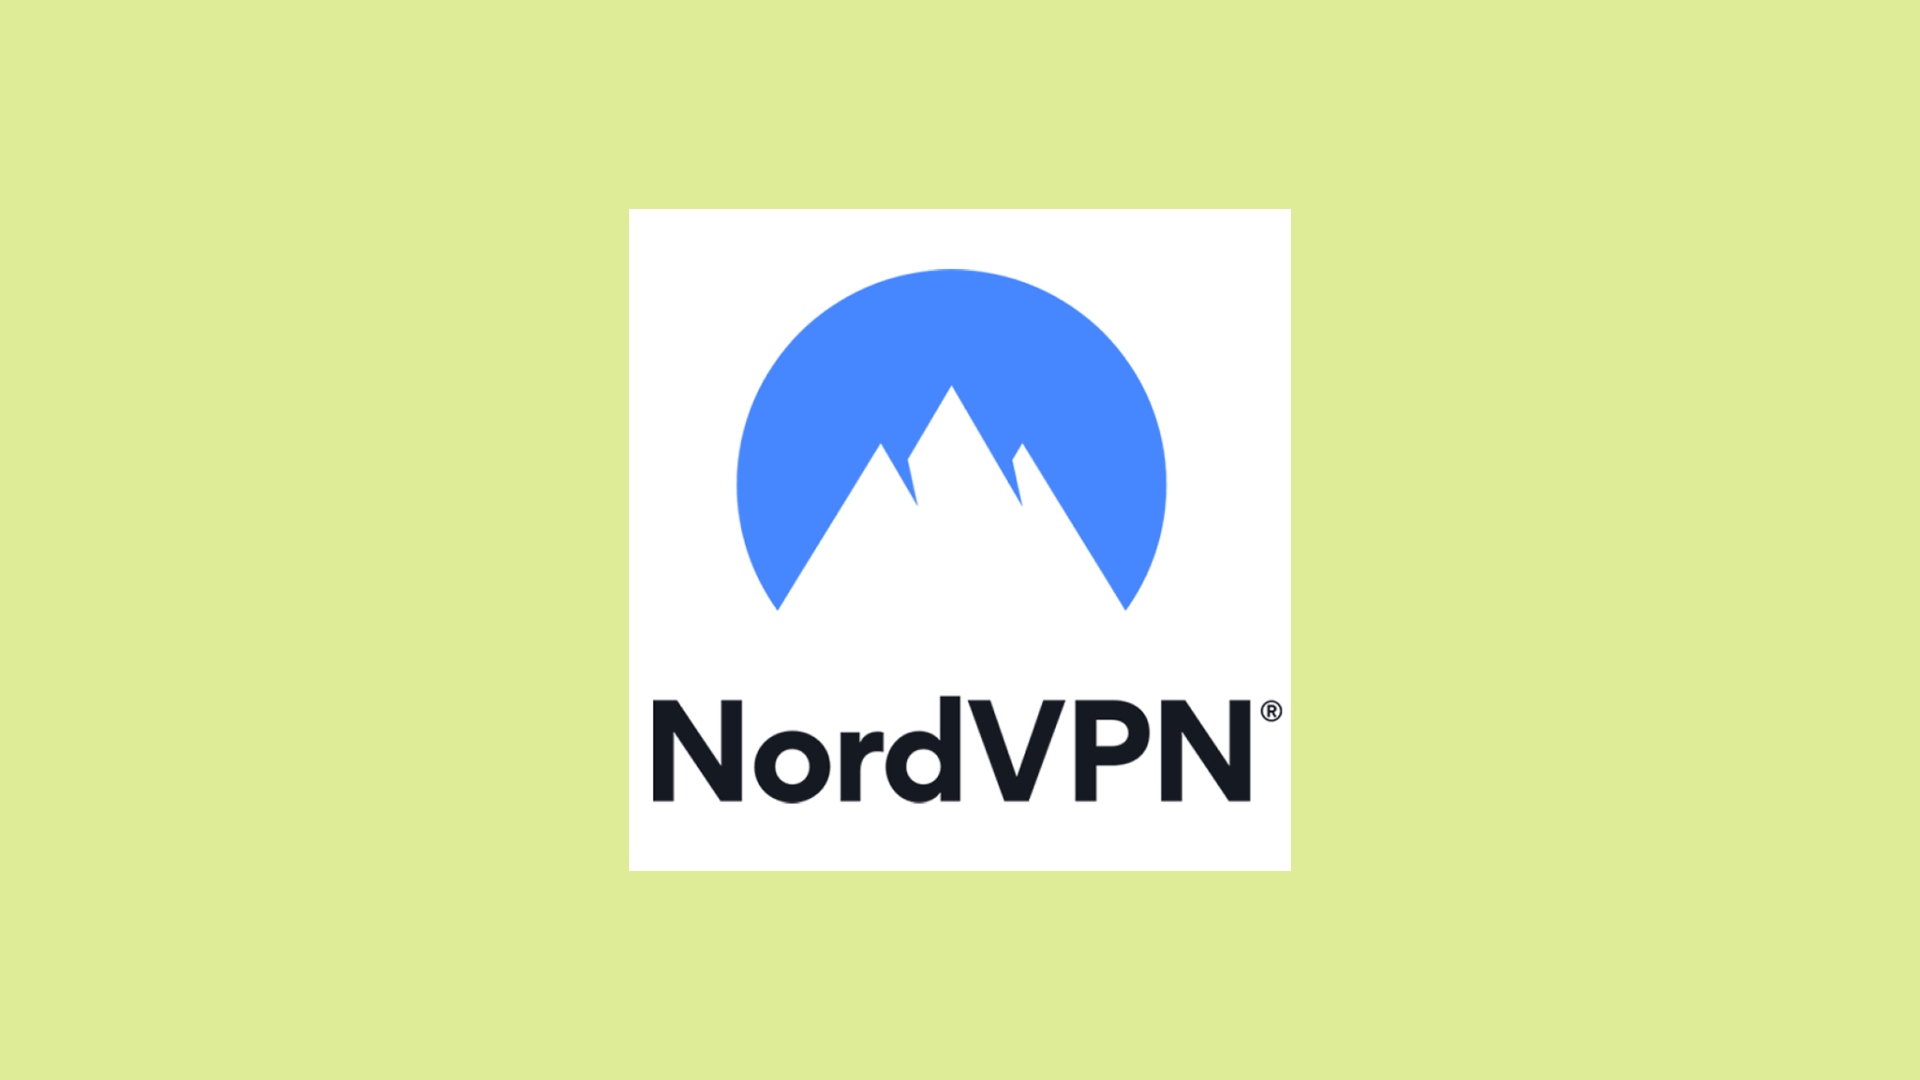 Best VPN for Xbox - NordVPN. Image shows the business's logo.